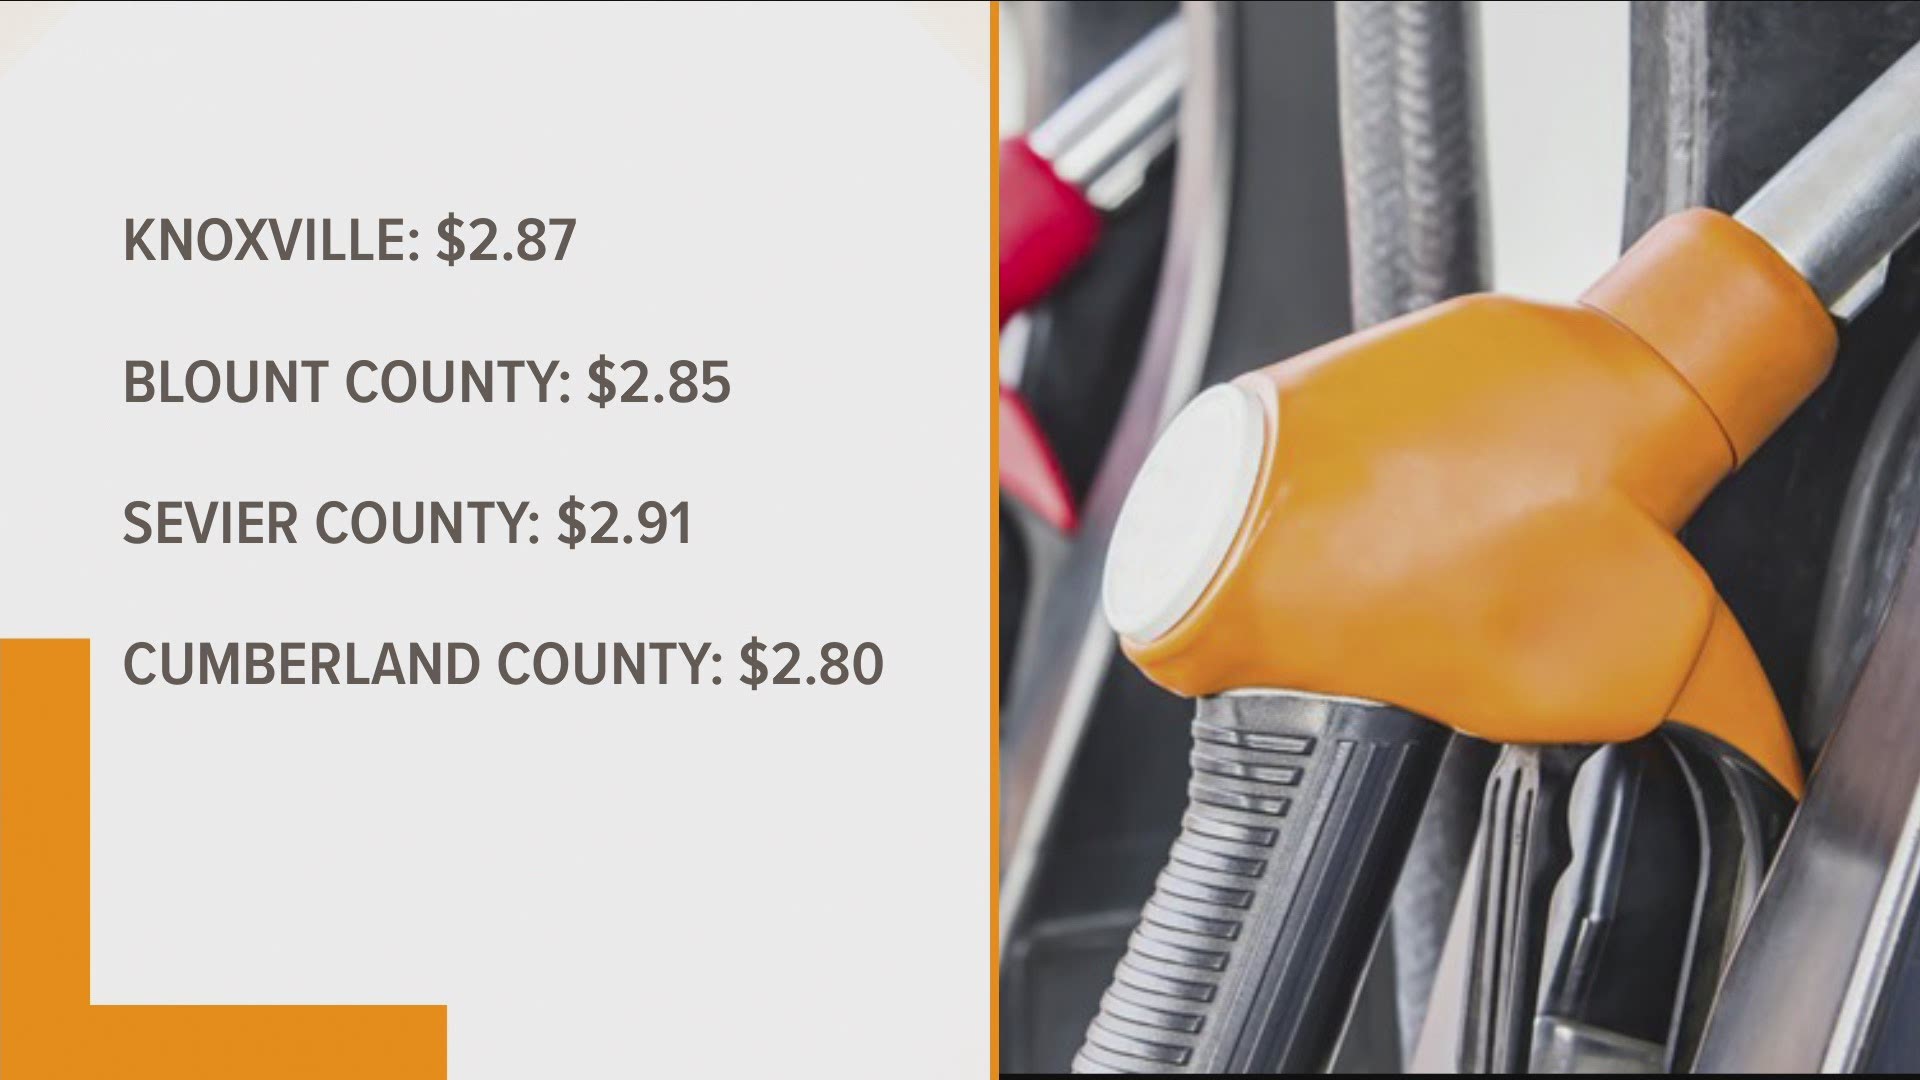 In Tennessee, the average price per gallon across the state was $2.857 Wednesday. GasBuddy reported that's nearly 3 cents cheaper than the U.S. average.